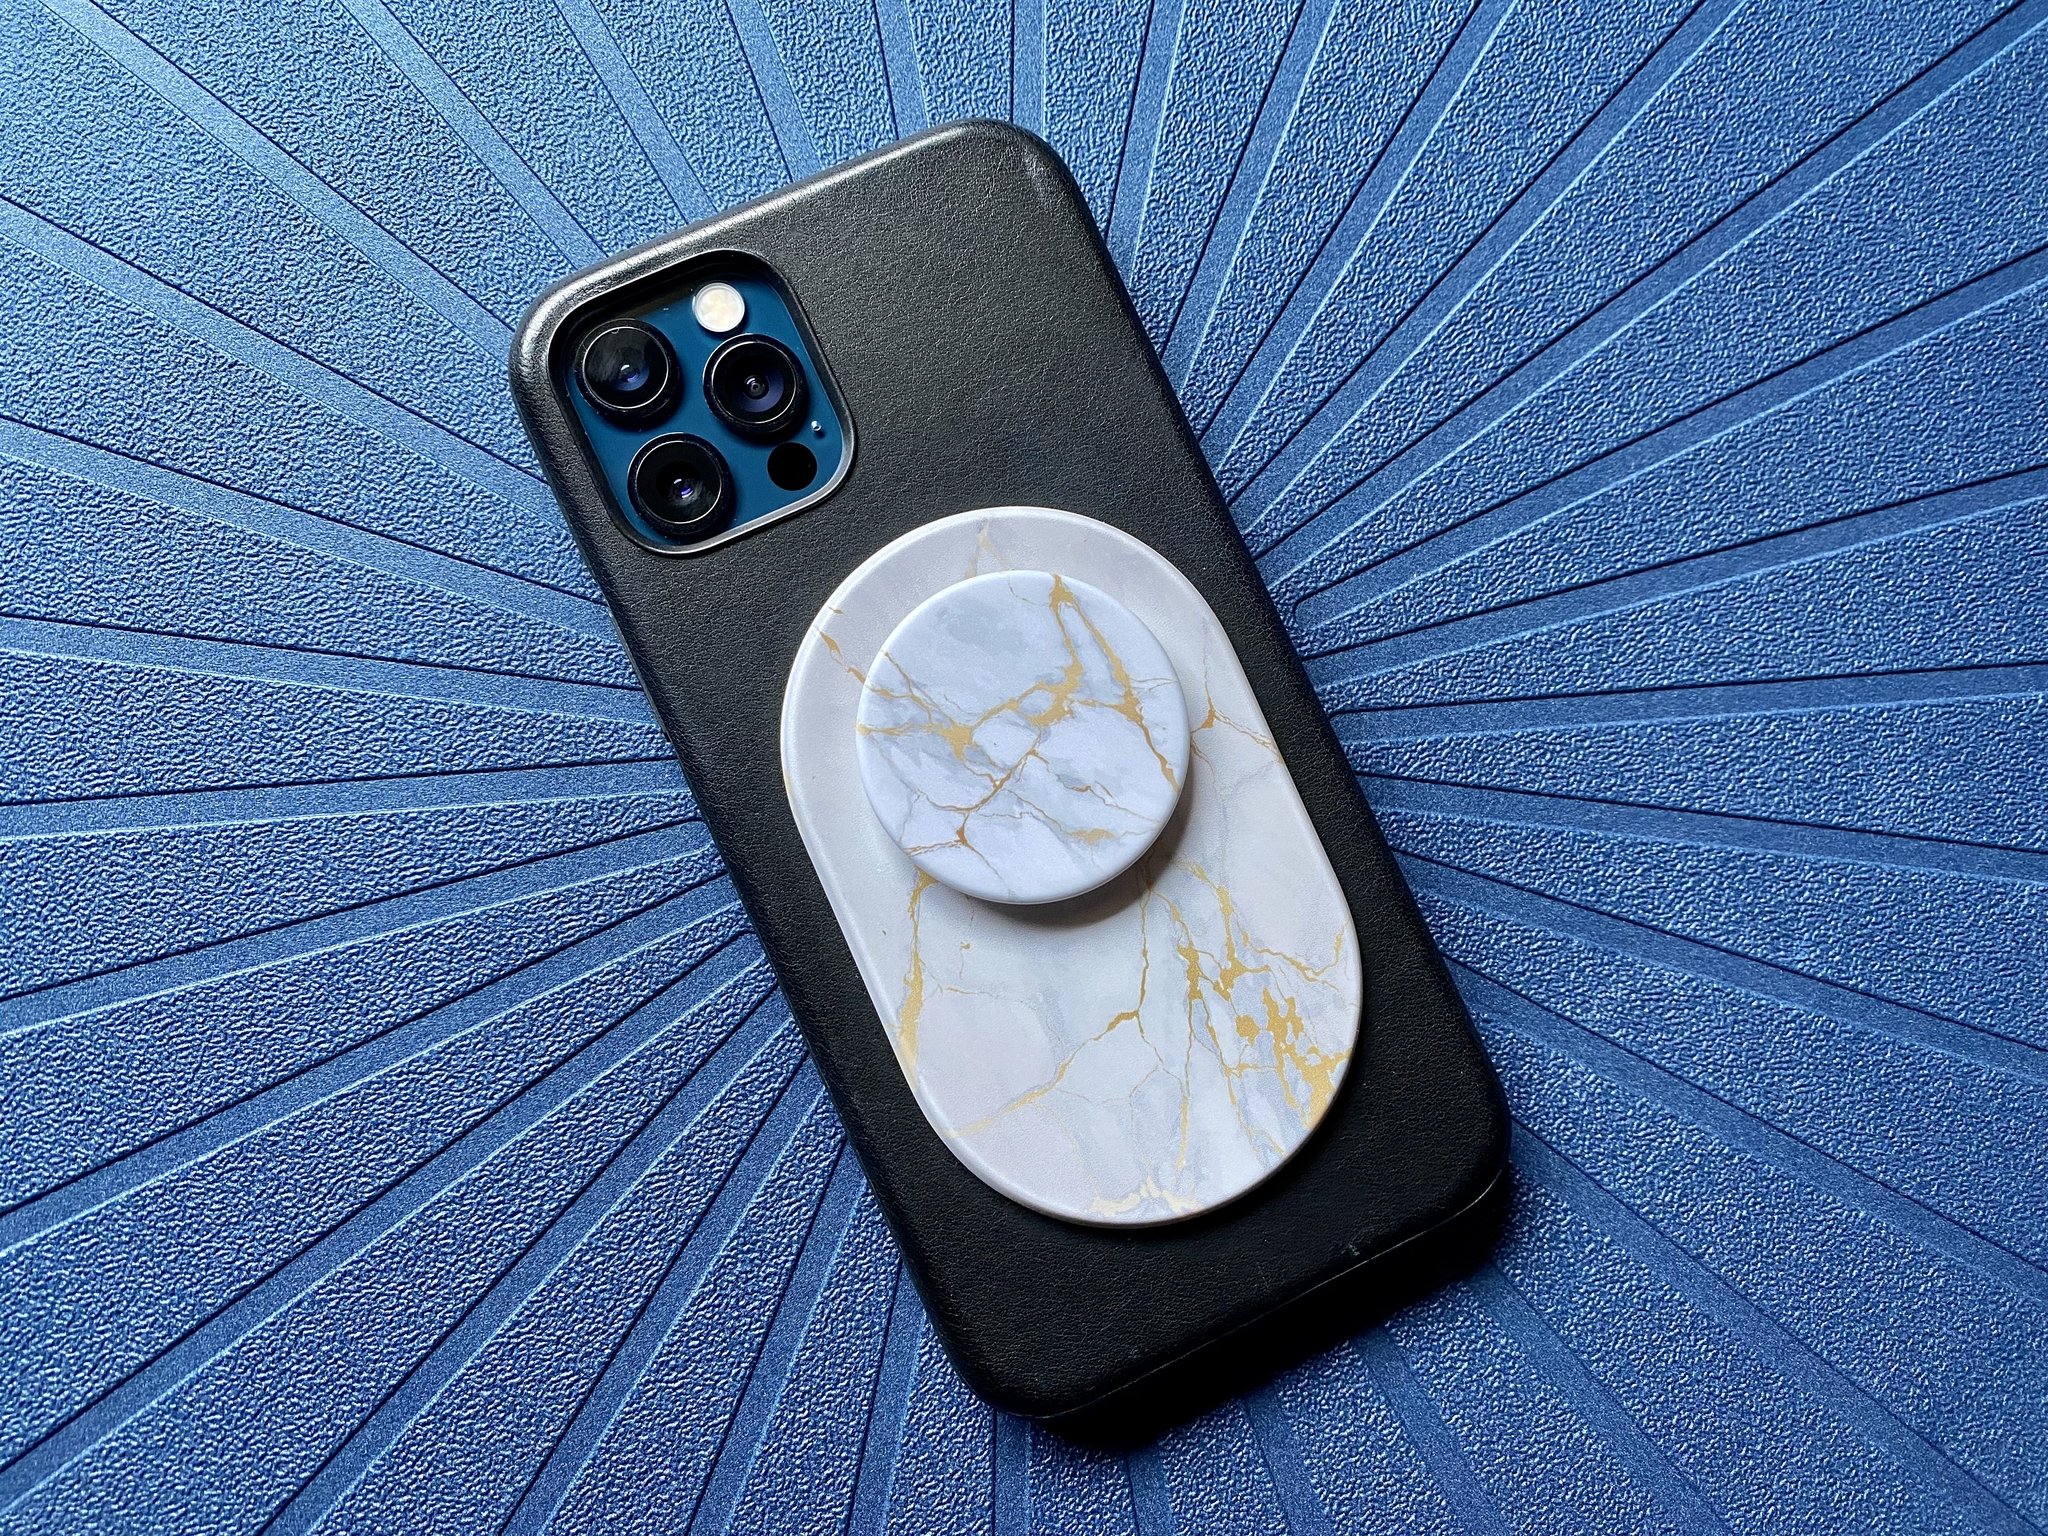 LV Popsocket  Popsockets, Leather cleaning, Reusable